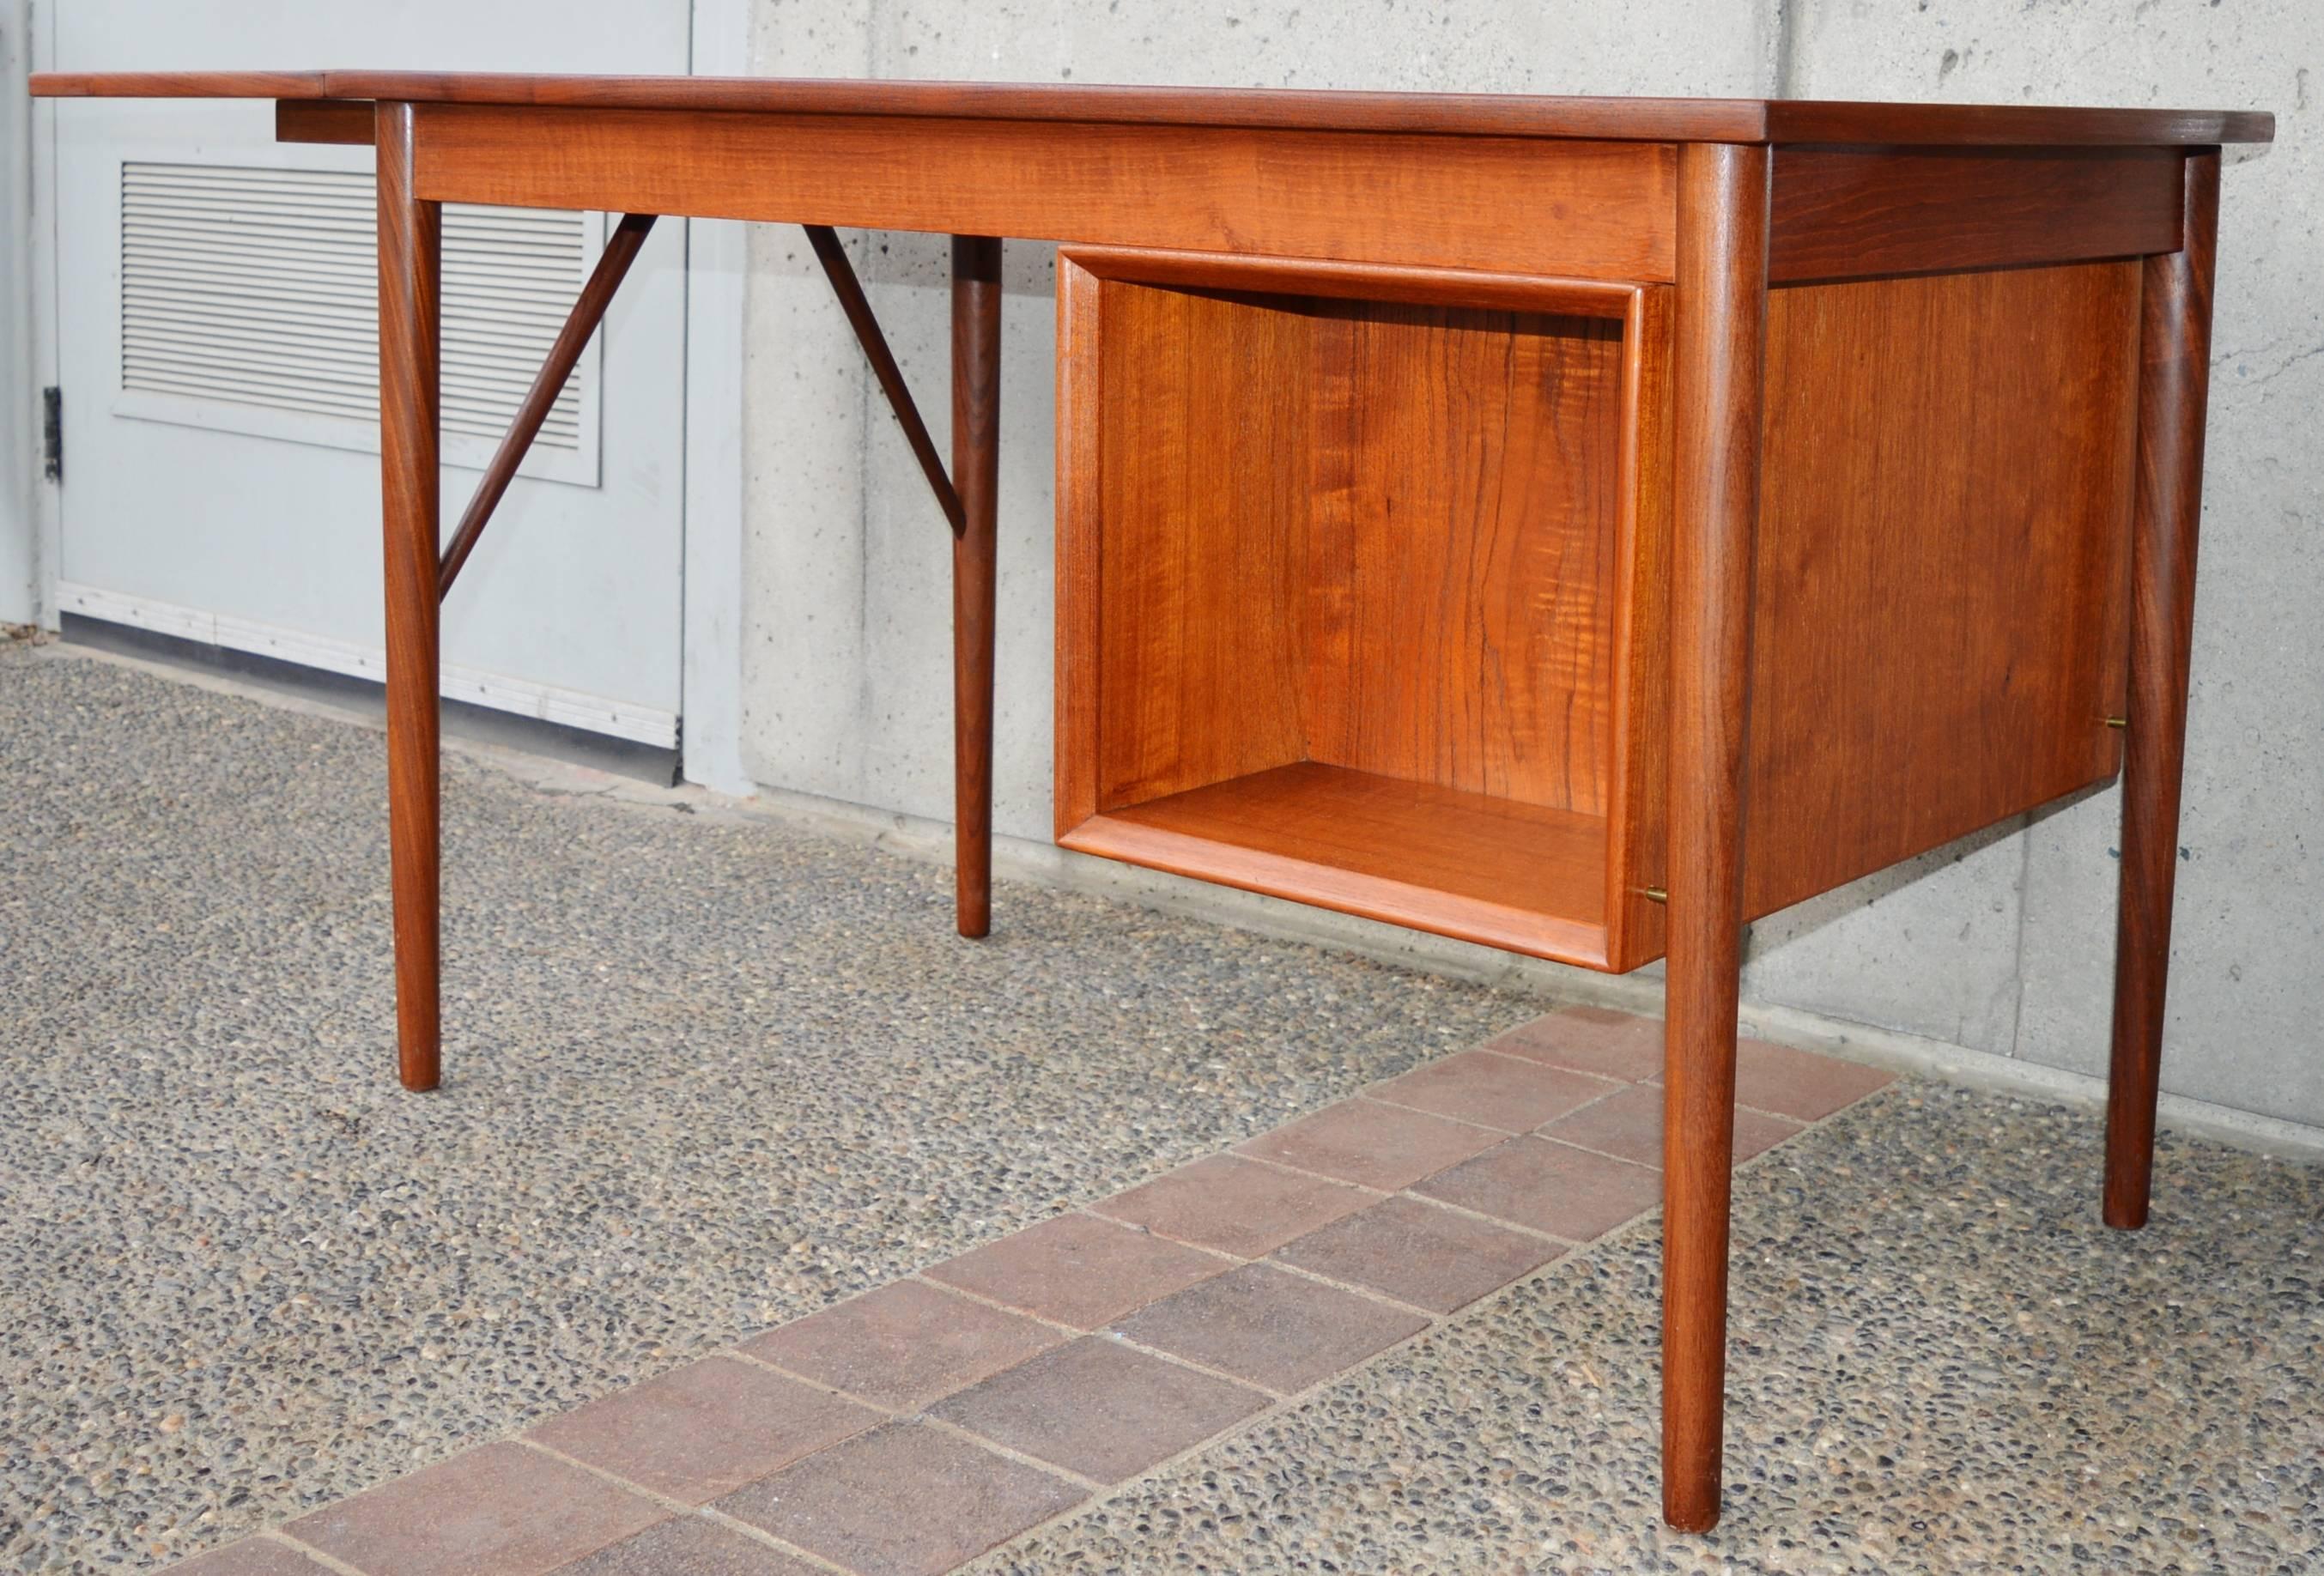 This stunning Danish modern teak top quality desk was designed by EW Bach for Oddense Maskinsnedkeri A-S in the 1960s. Featuring a darker toned edge trim and legs, and a rich patina throughout. The front features a bank of three drawers with a